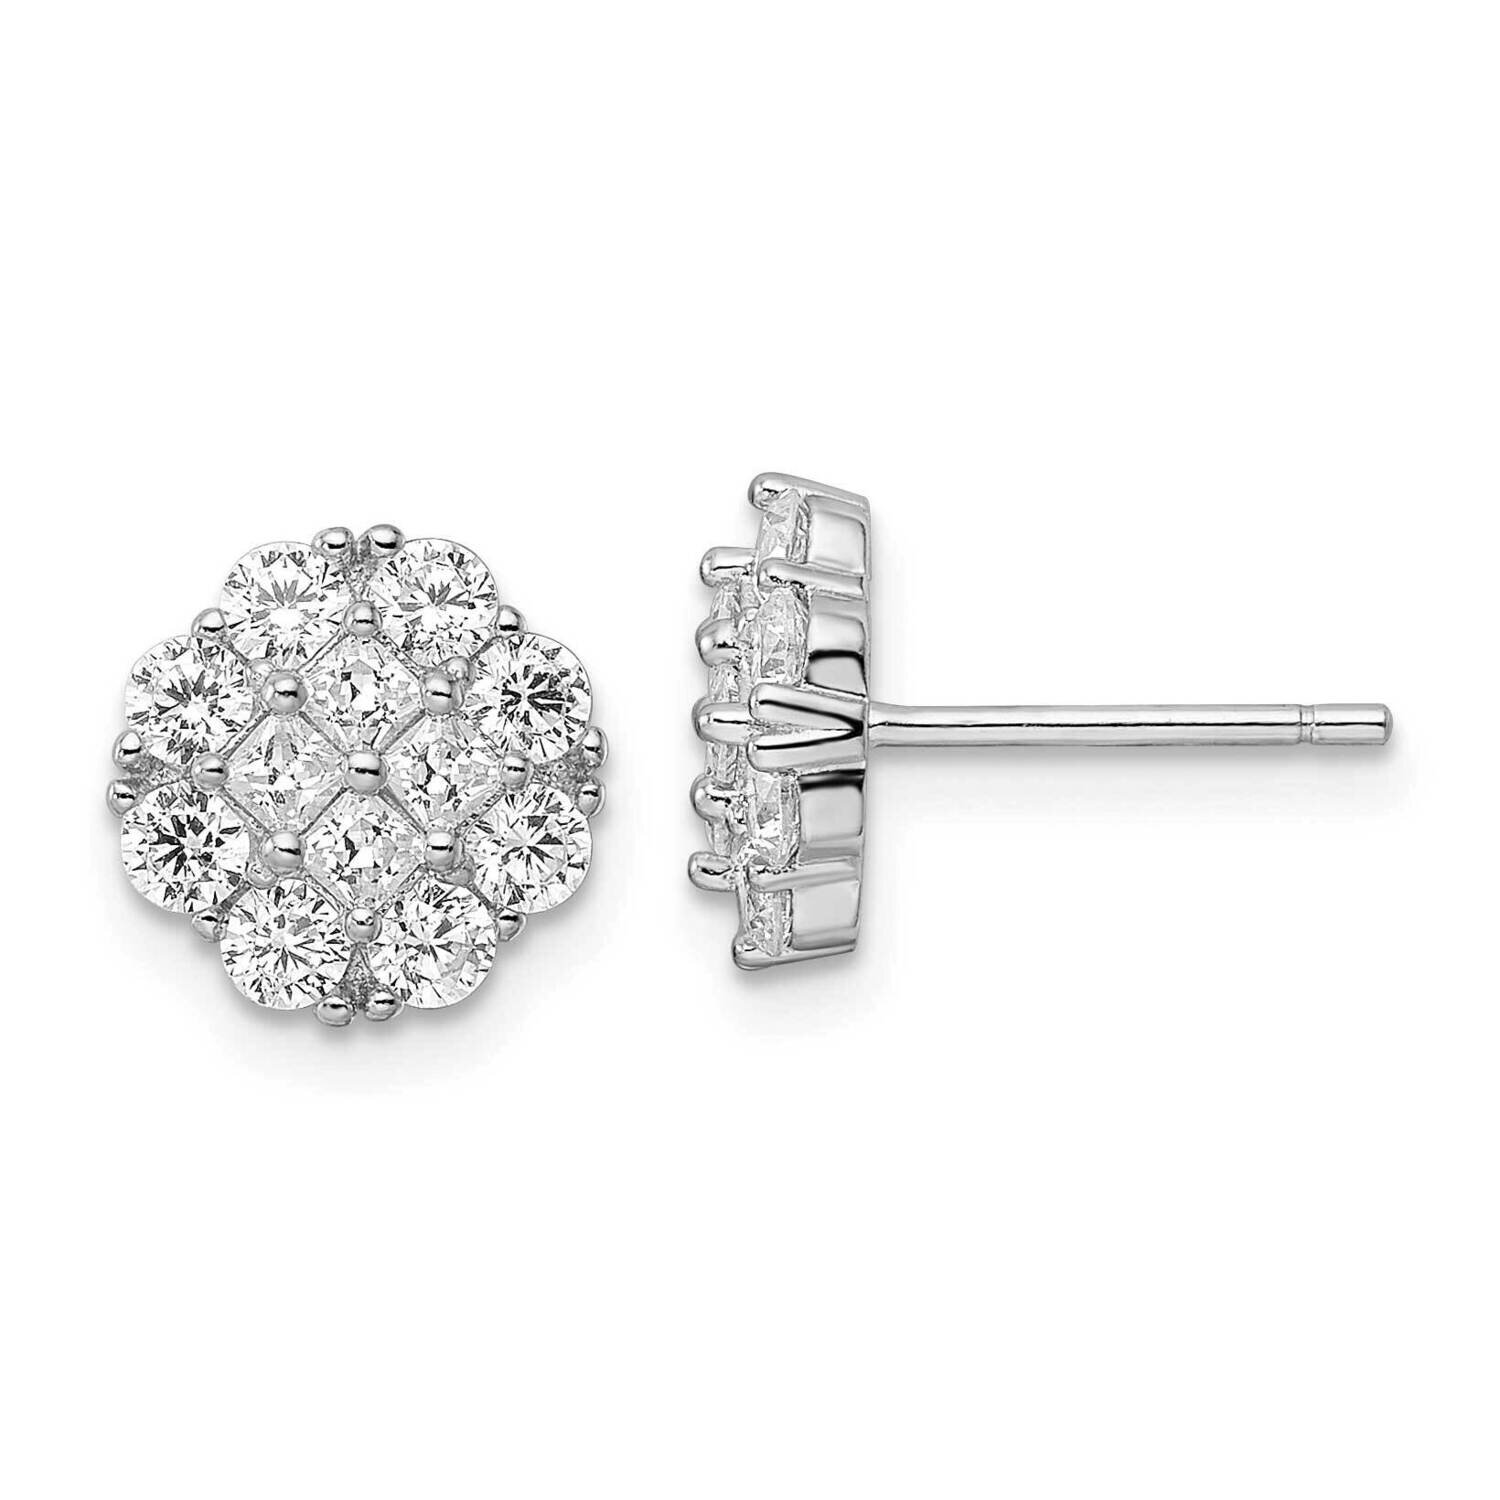 Flower Cluster CZ Diamond Post Earrings Sterling Silver Rhodium-Plated Polished QE16121